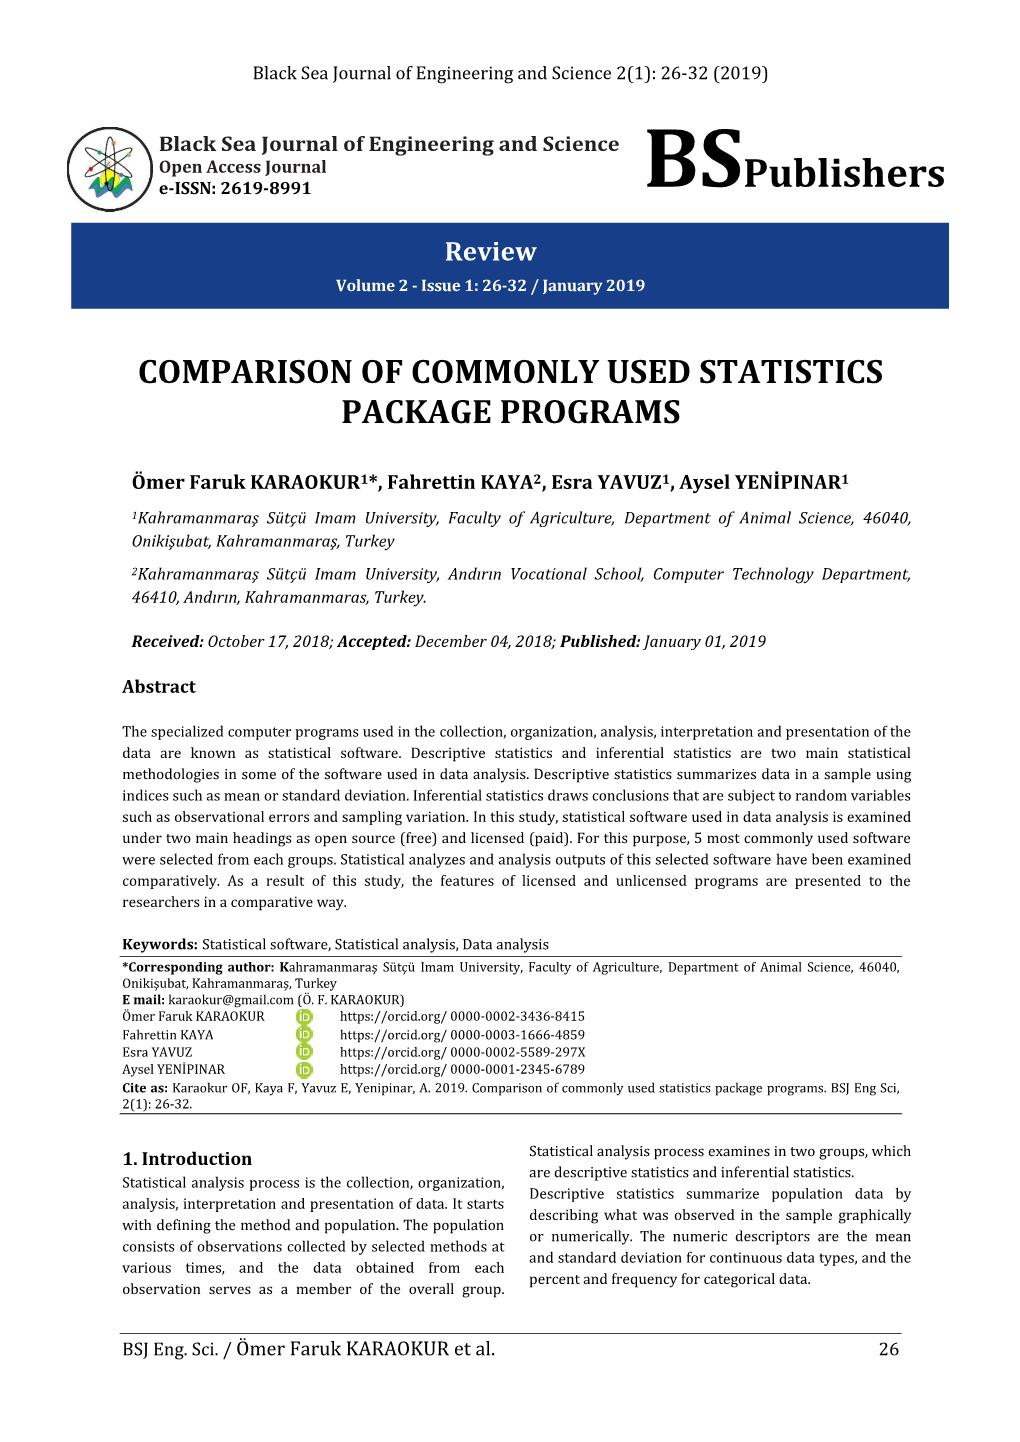 Comparison of Commonly Used Statistics Package Programs